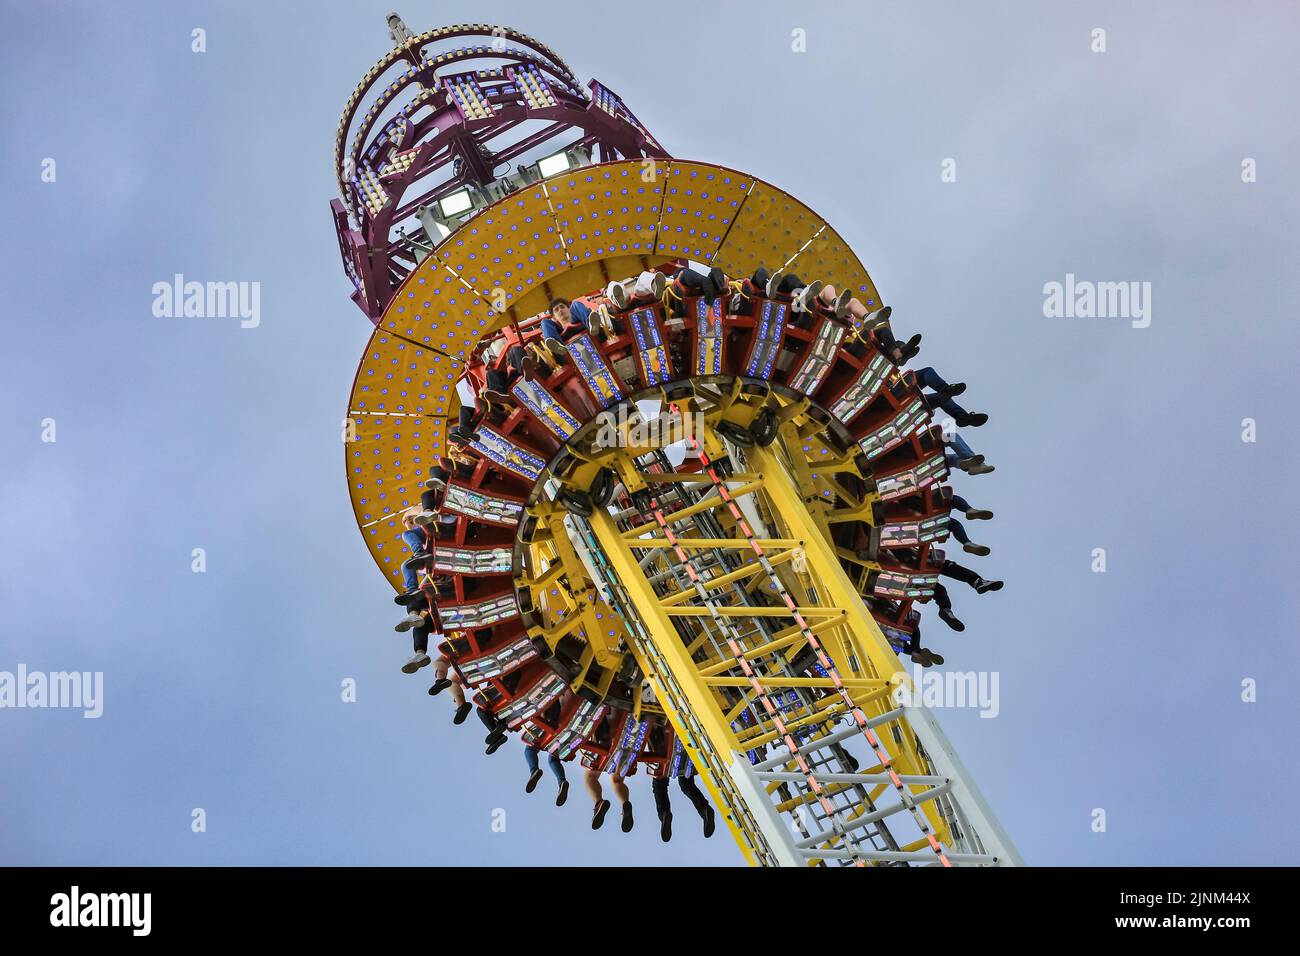 People on Hangover - The Tower ride at Cranger Kirmes, Germany Stock Photo